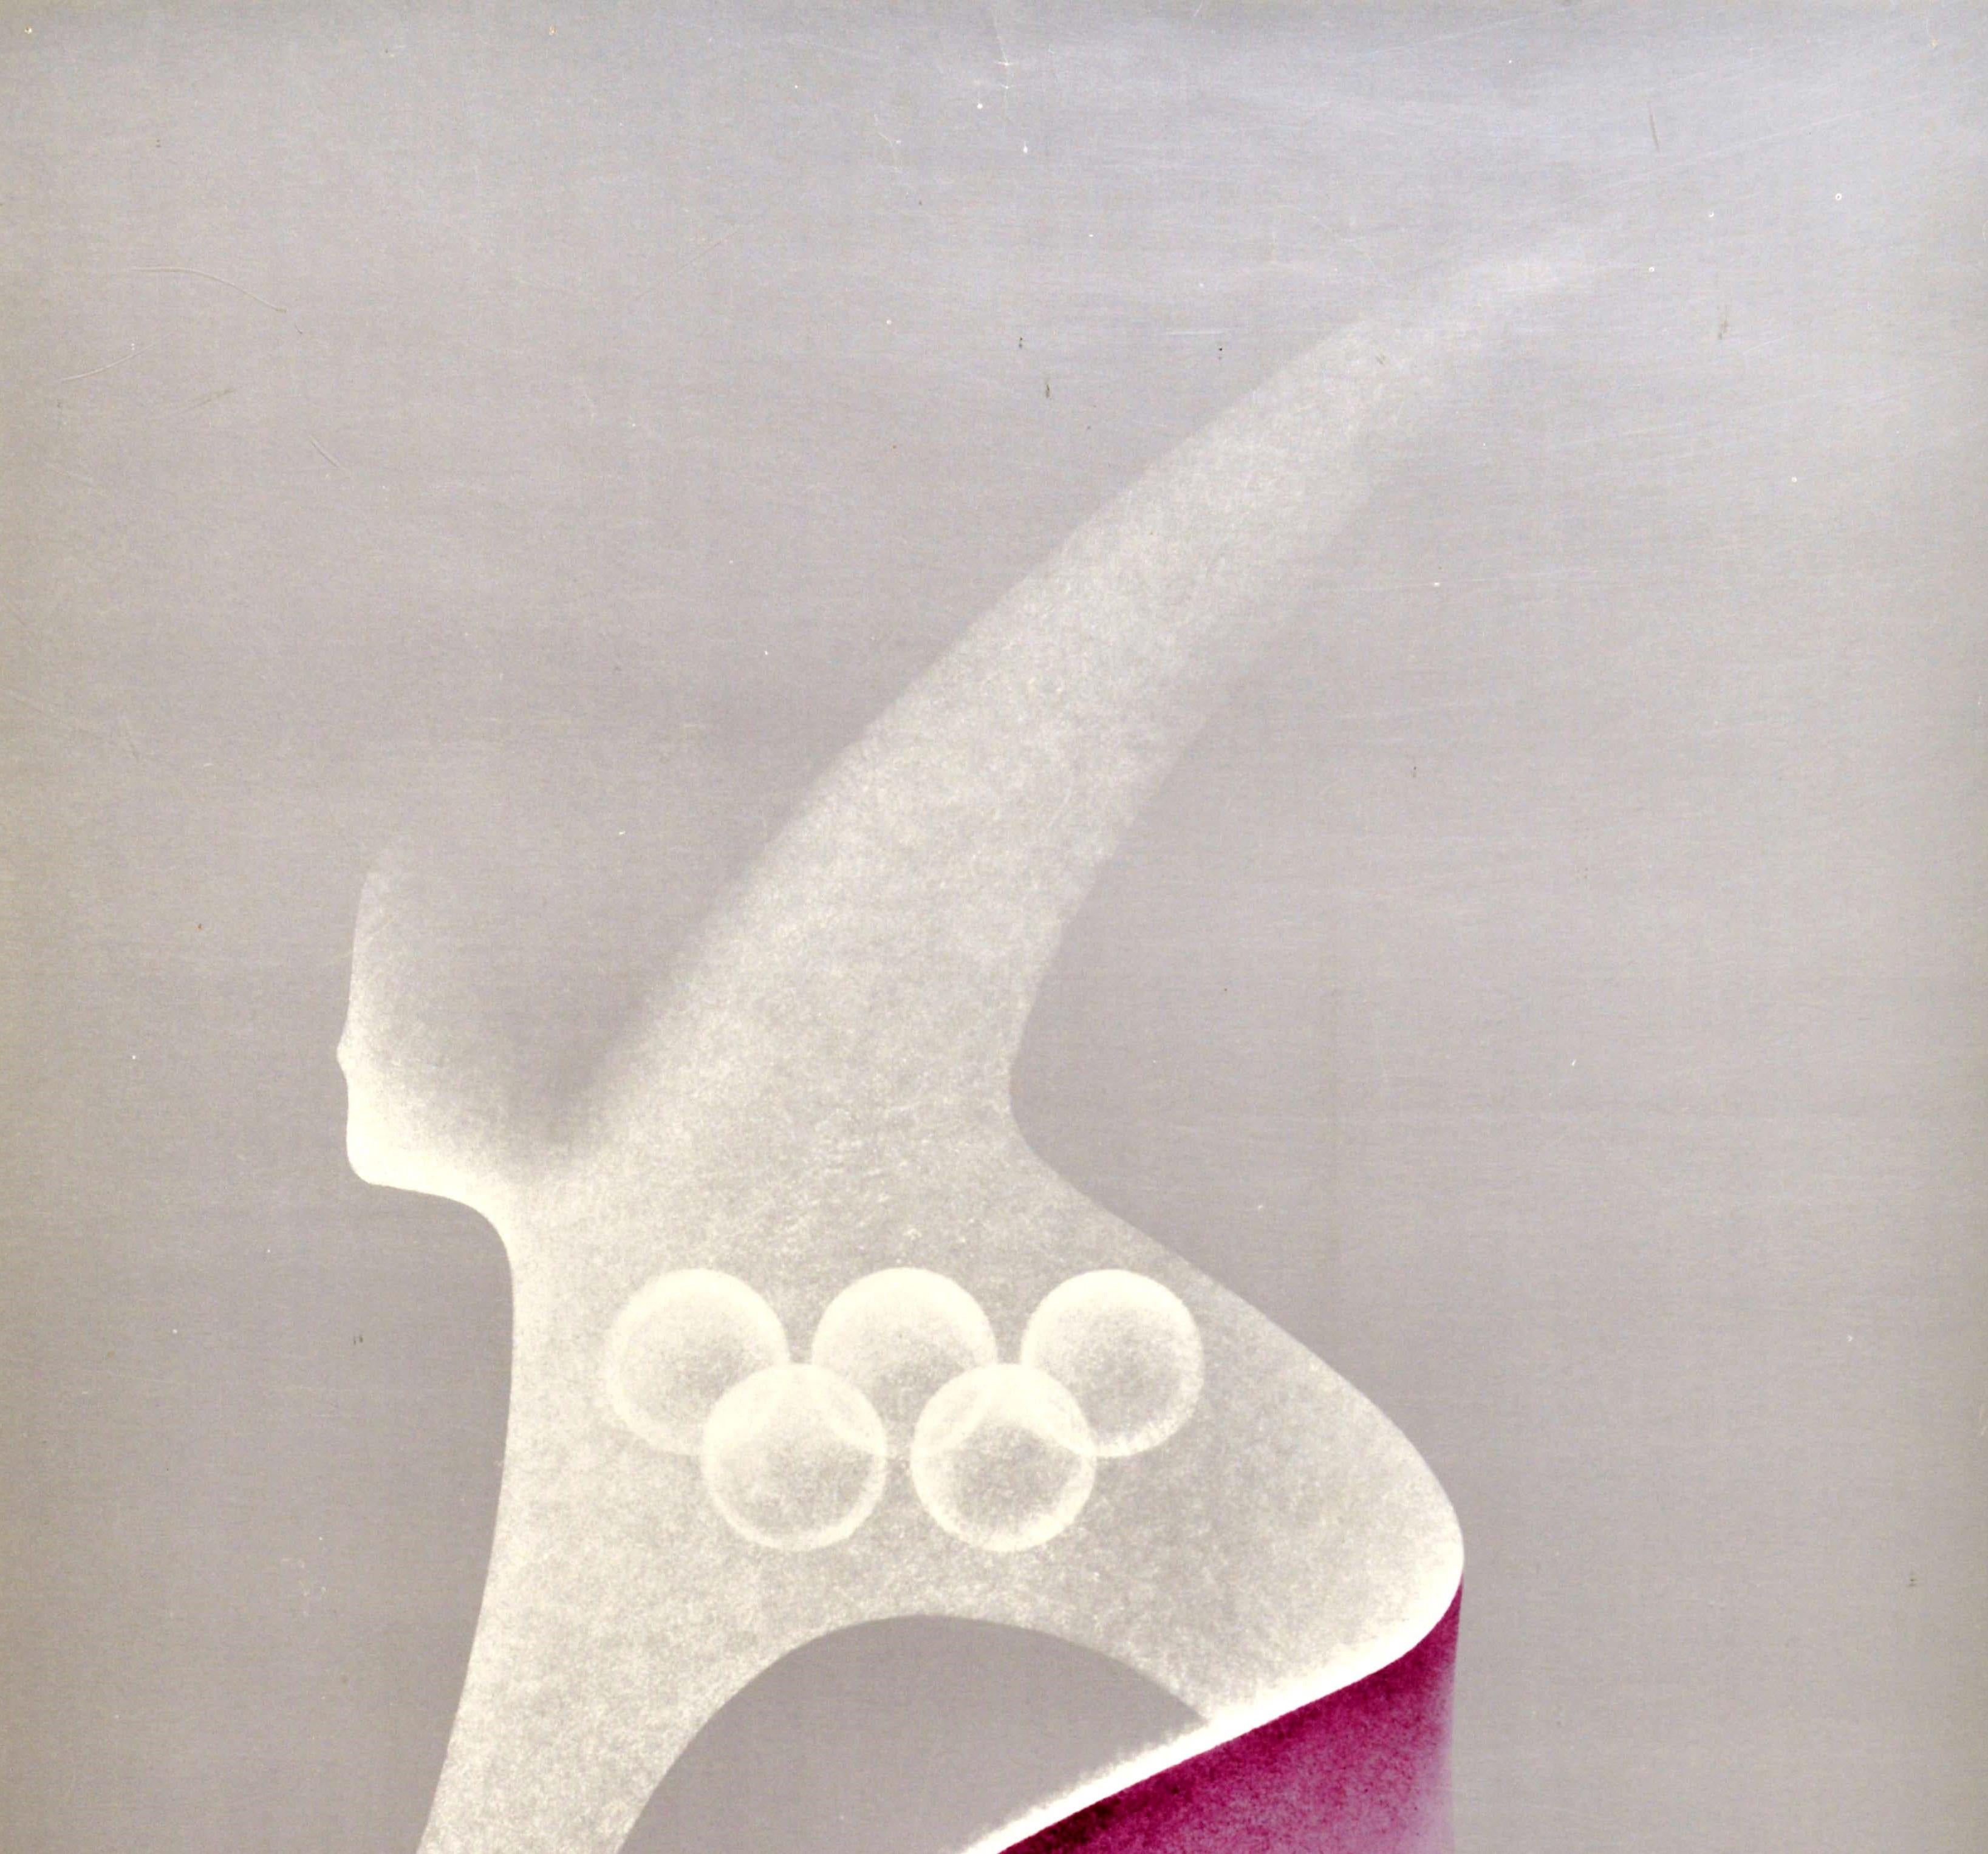 Original vintage Soviet sport poster for the 22nd Summer Olympic Games / the Games of the XXII Olympiad in 1980 held in Moscow Russia featuring a great graphic illustration by the Polish artist Karol Sliwka (1932-2018) of an athlete leaning forward